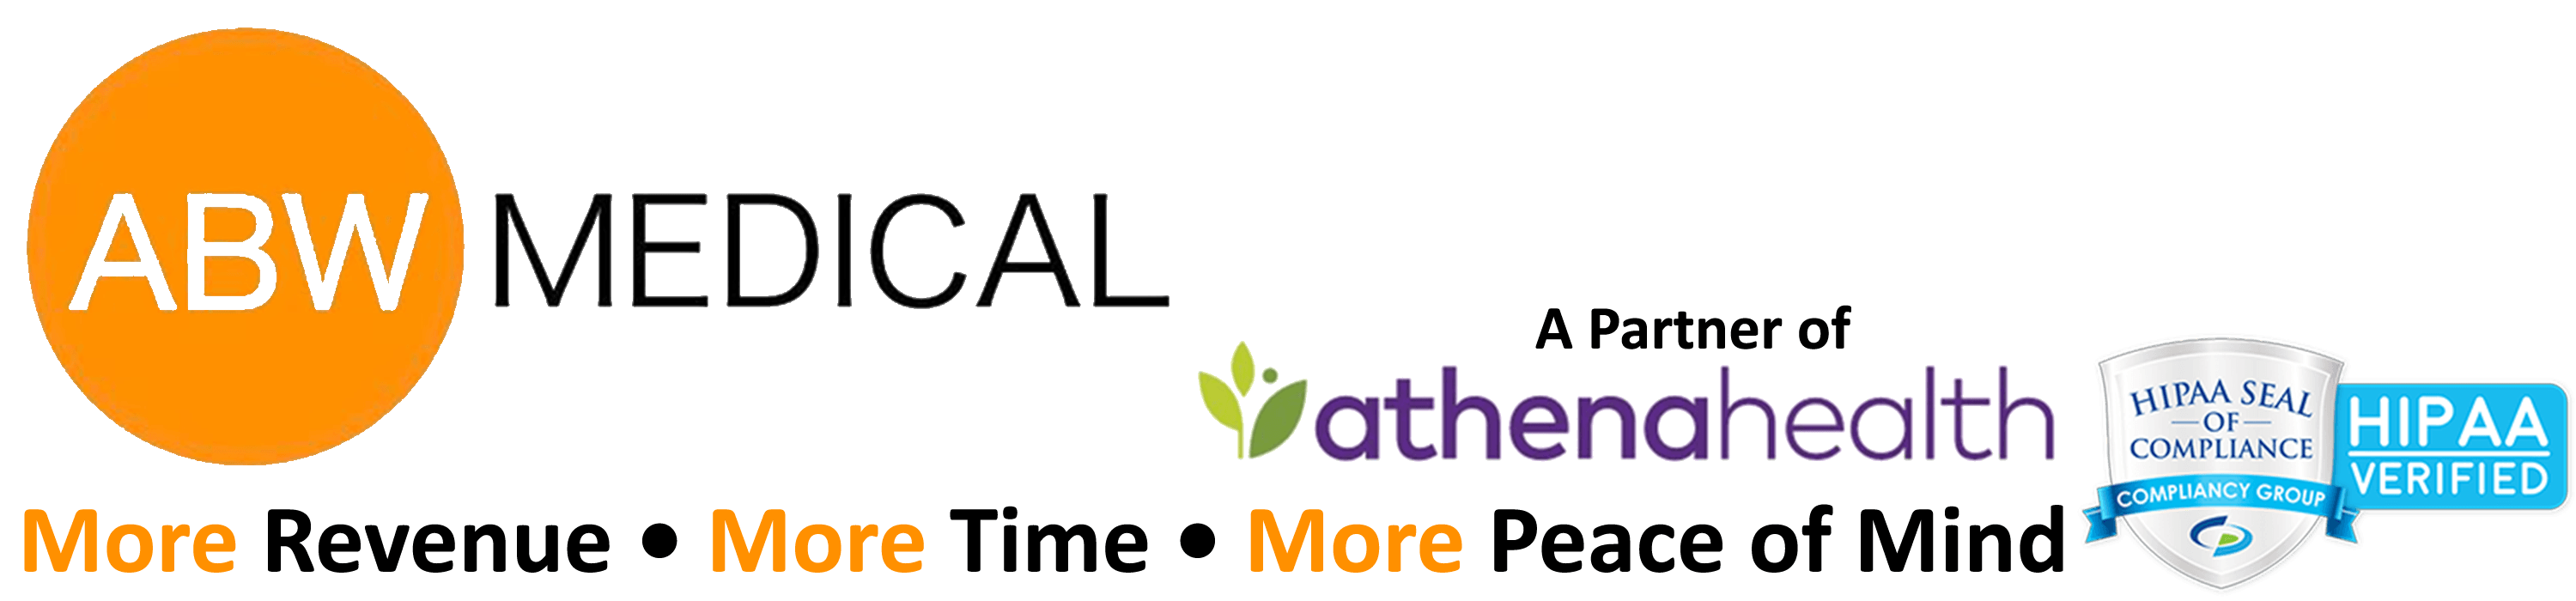 Athenahealth Logo - Home - ABW Medical More Money | More Time | More Peace of Mind